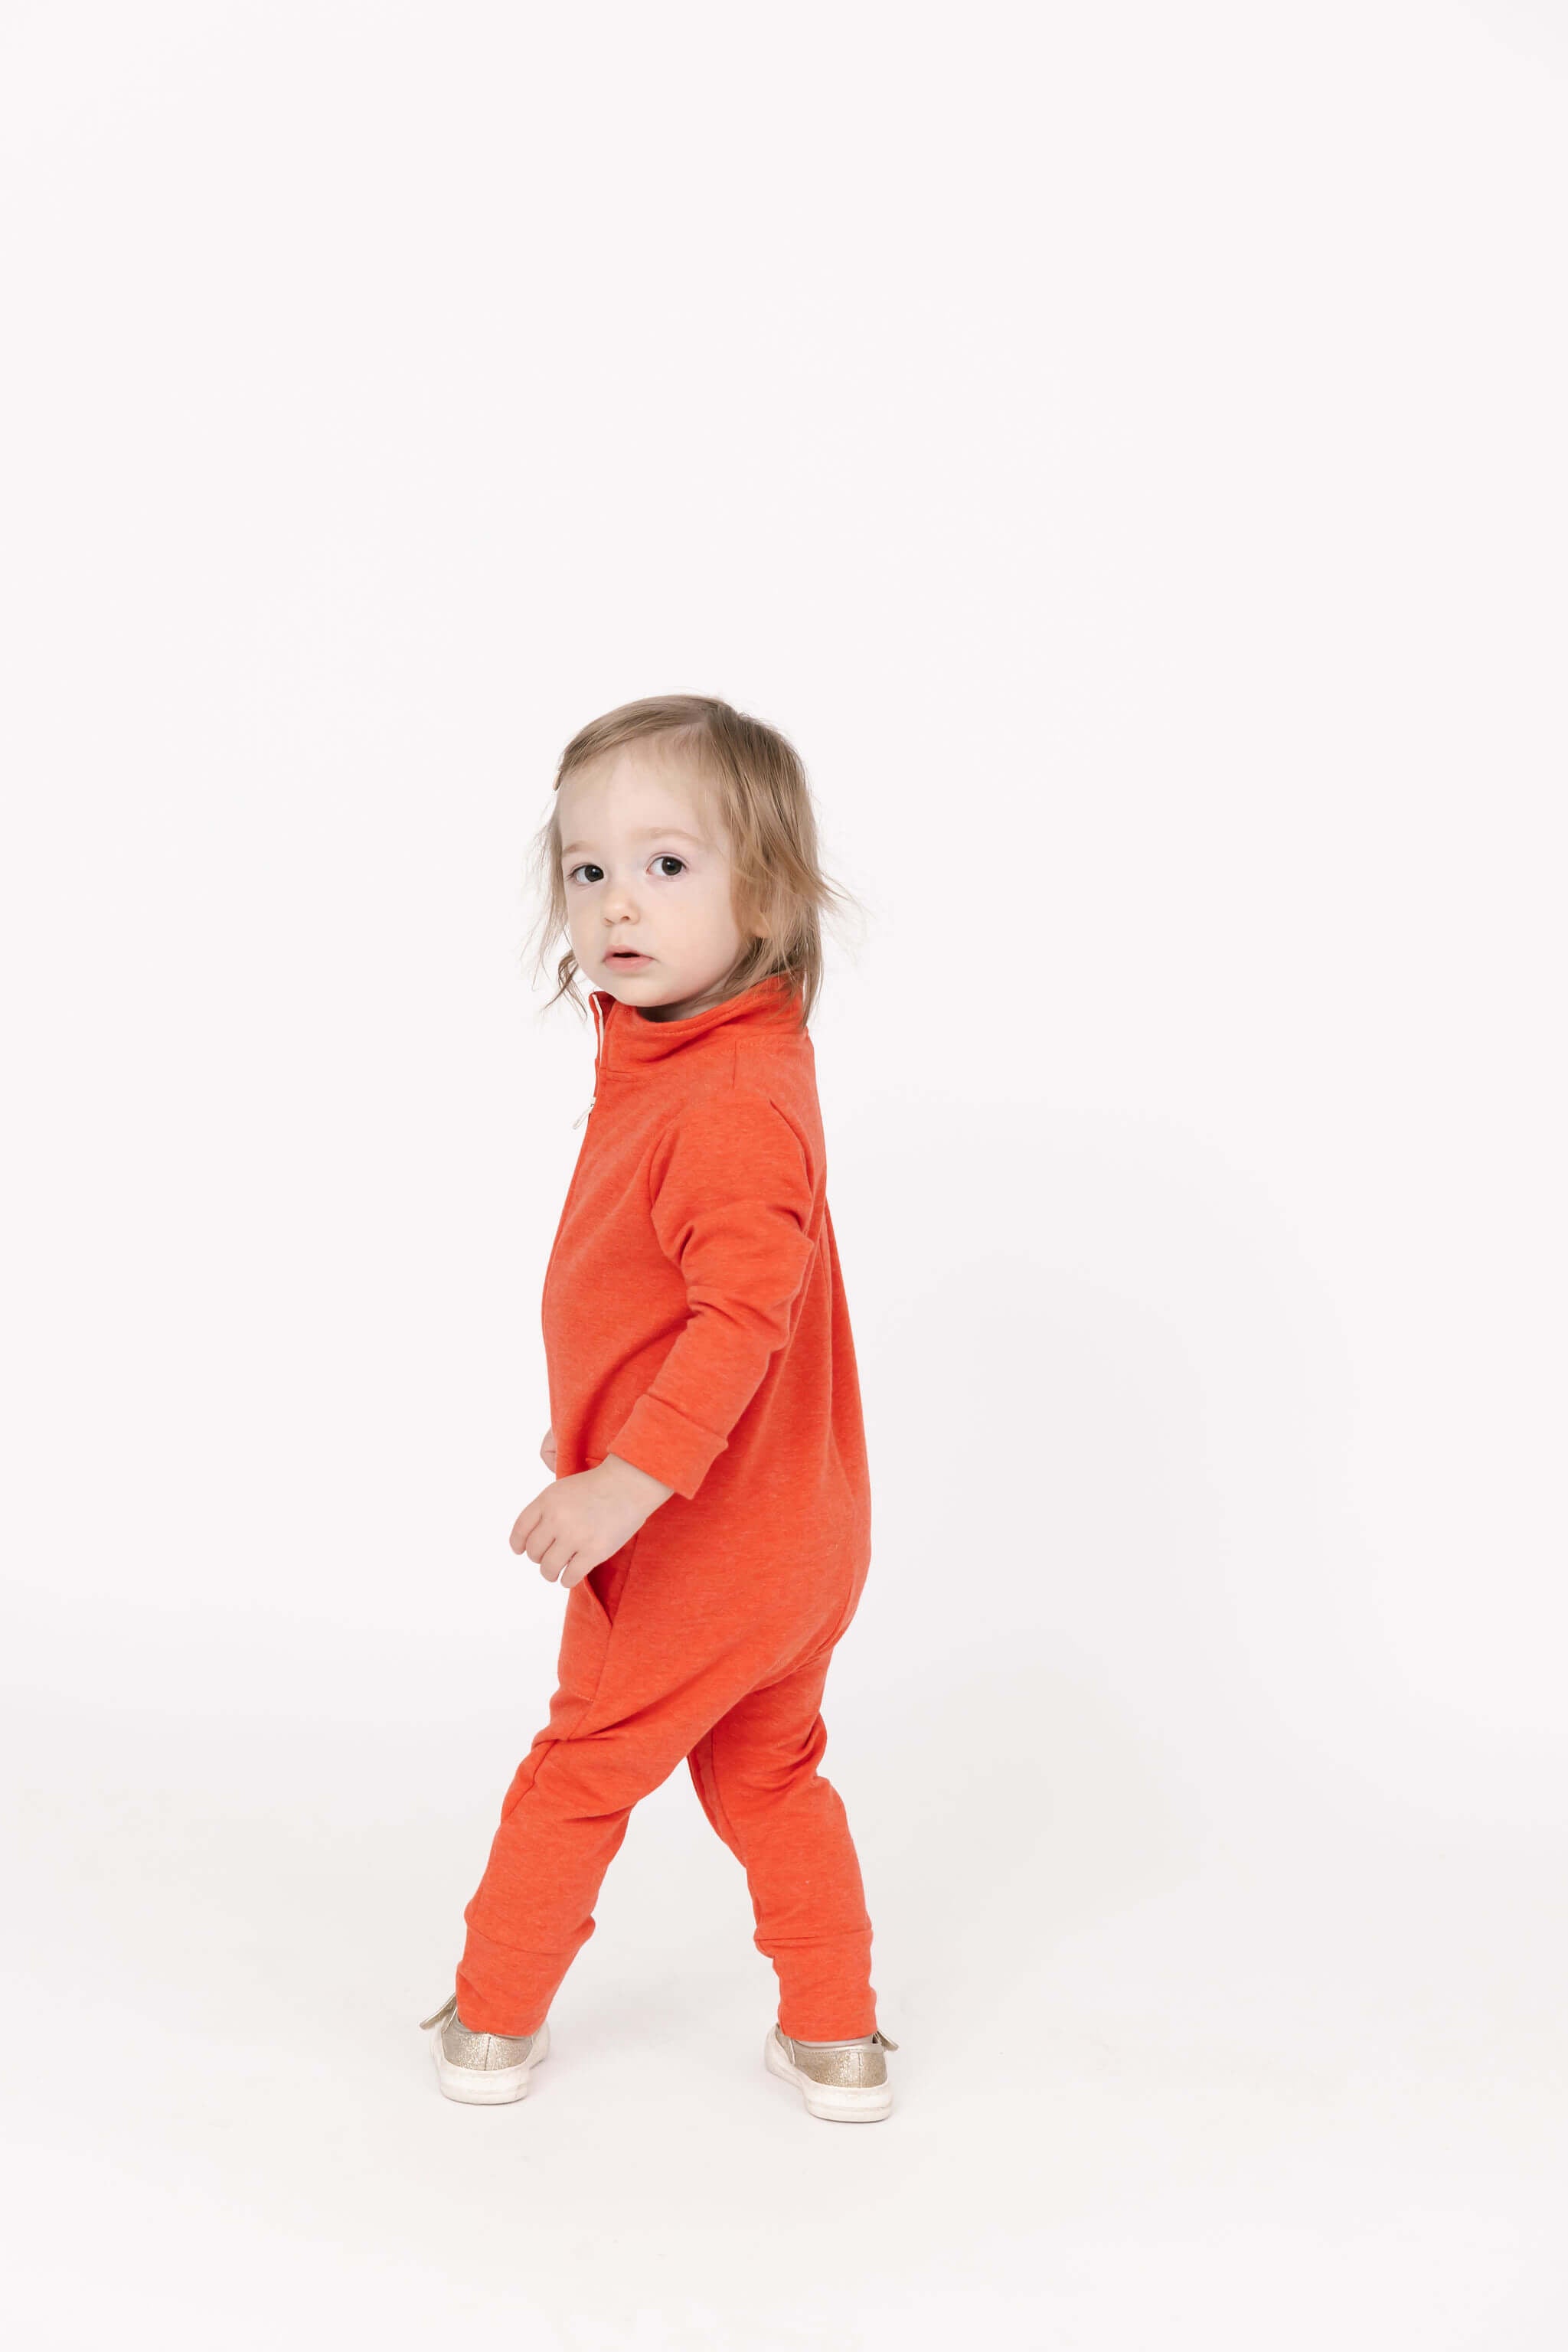 Jillian Harris and Smash + Tess Kids Shay Romper in Holly Red